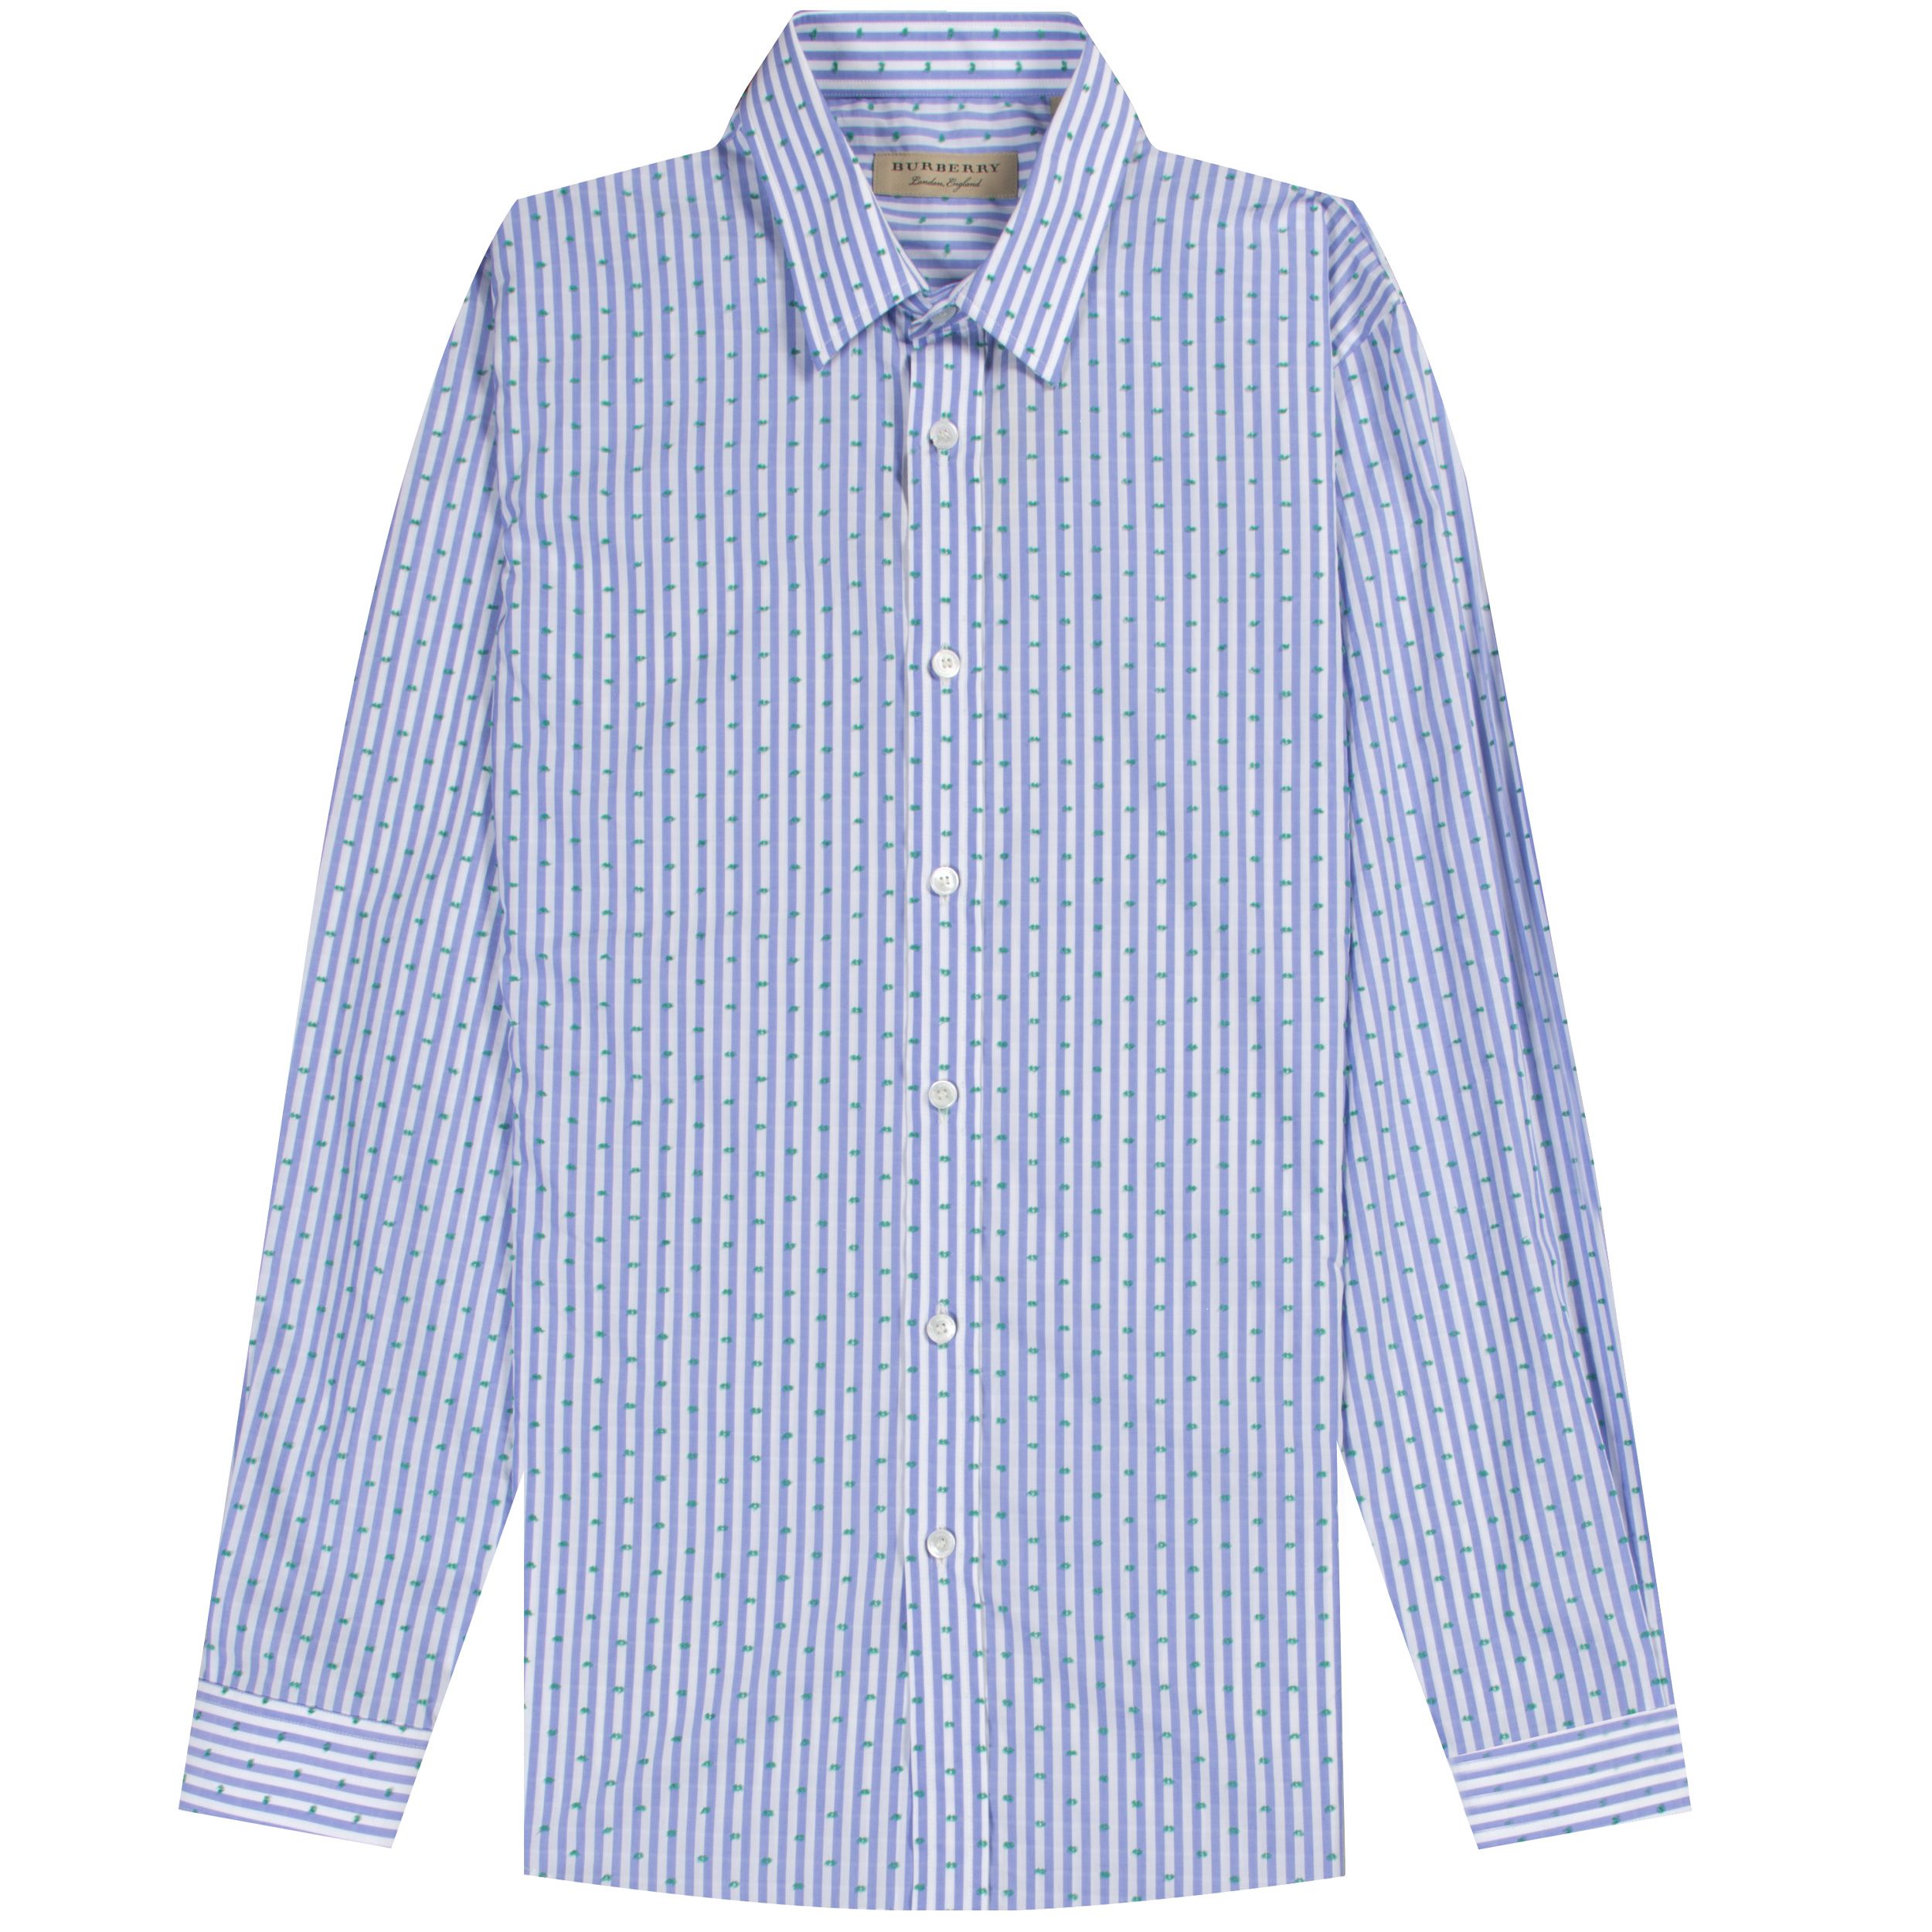 Men's Burberry Shirt - Perfect For Casual and Business Clothing ...